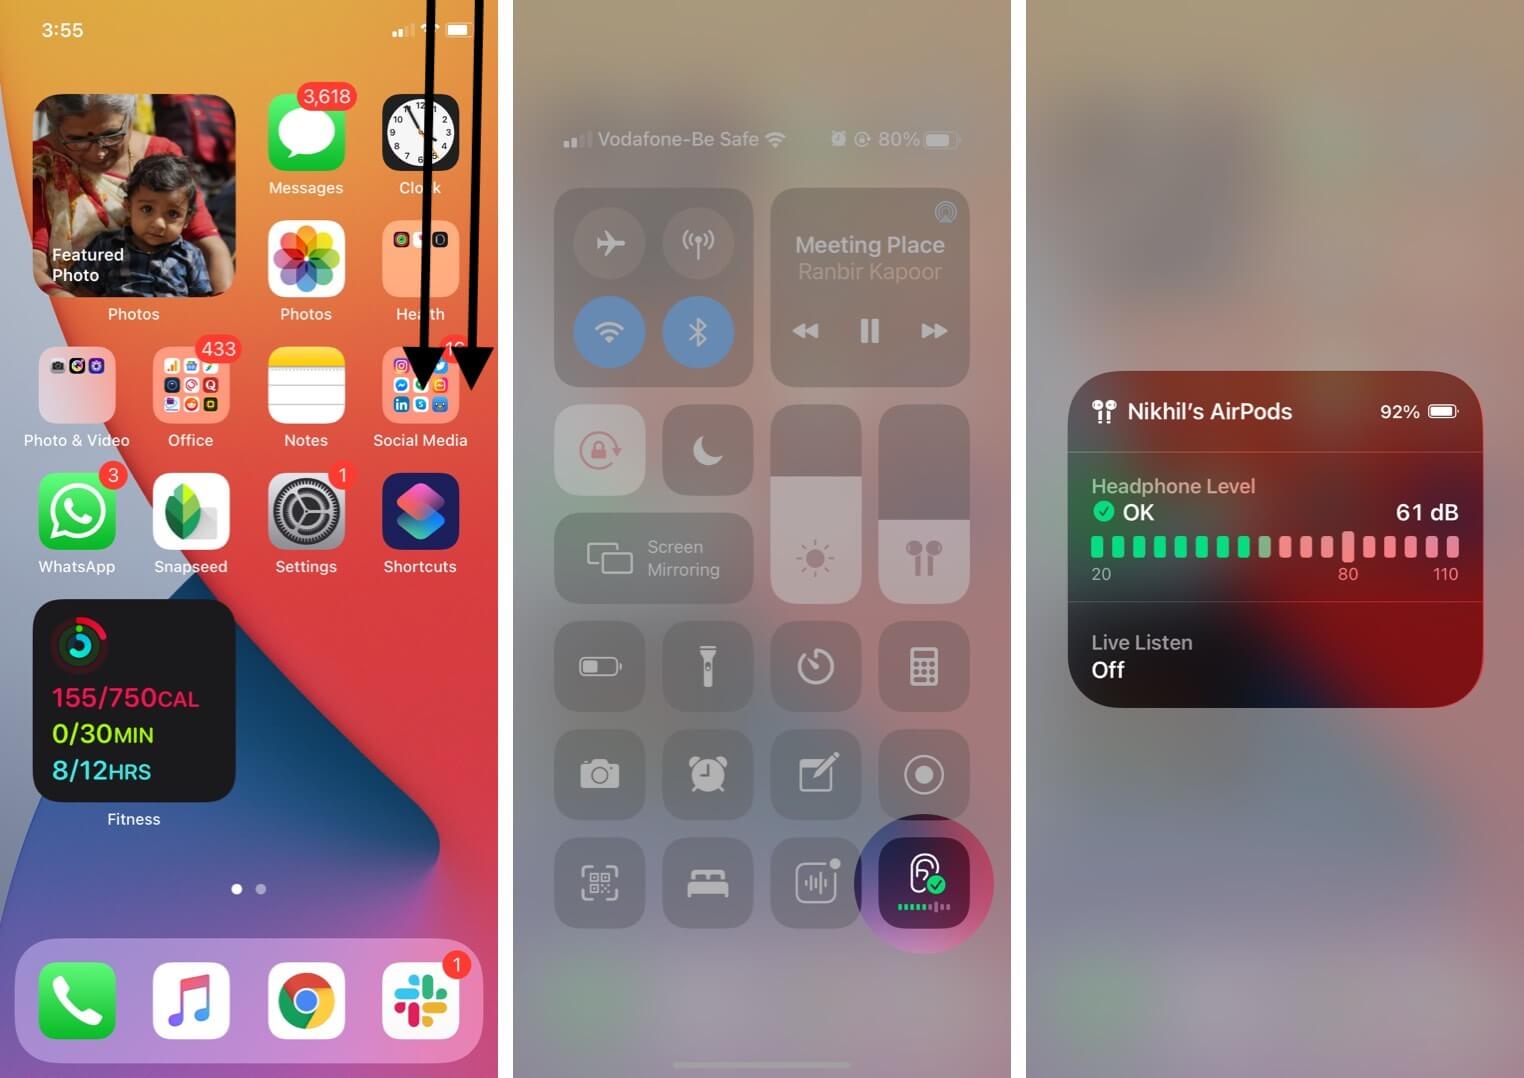 open control center and tap on hearing icon to check real-time headphone audio